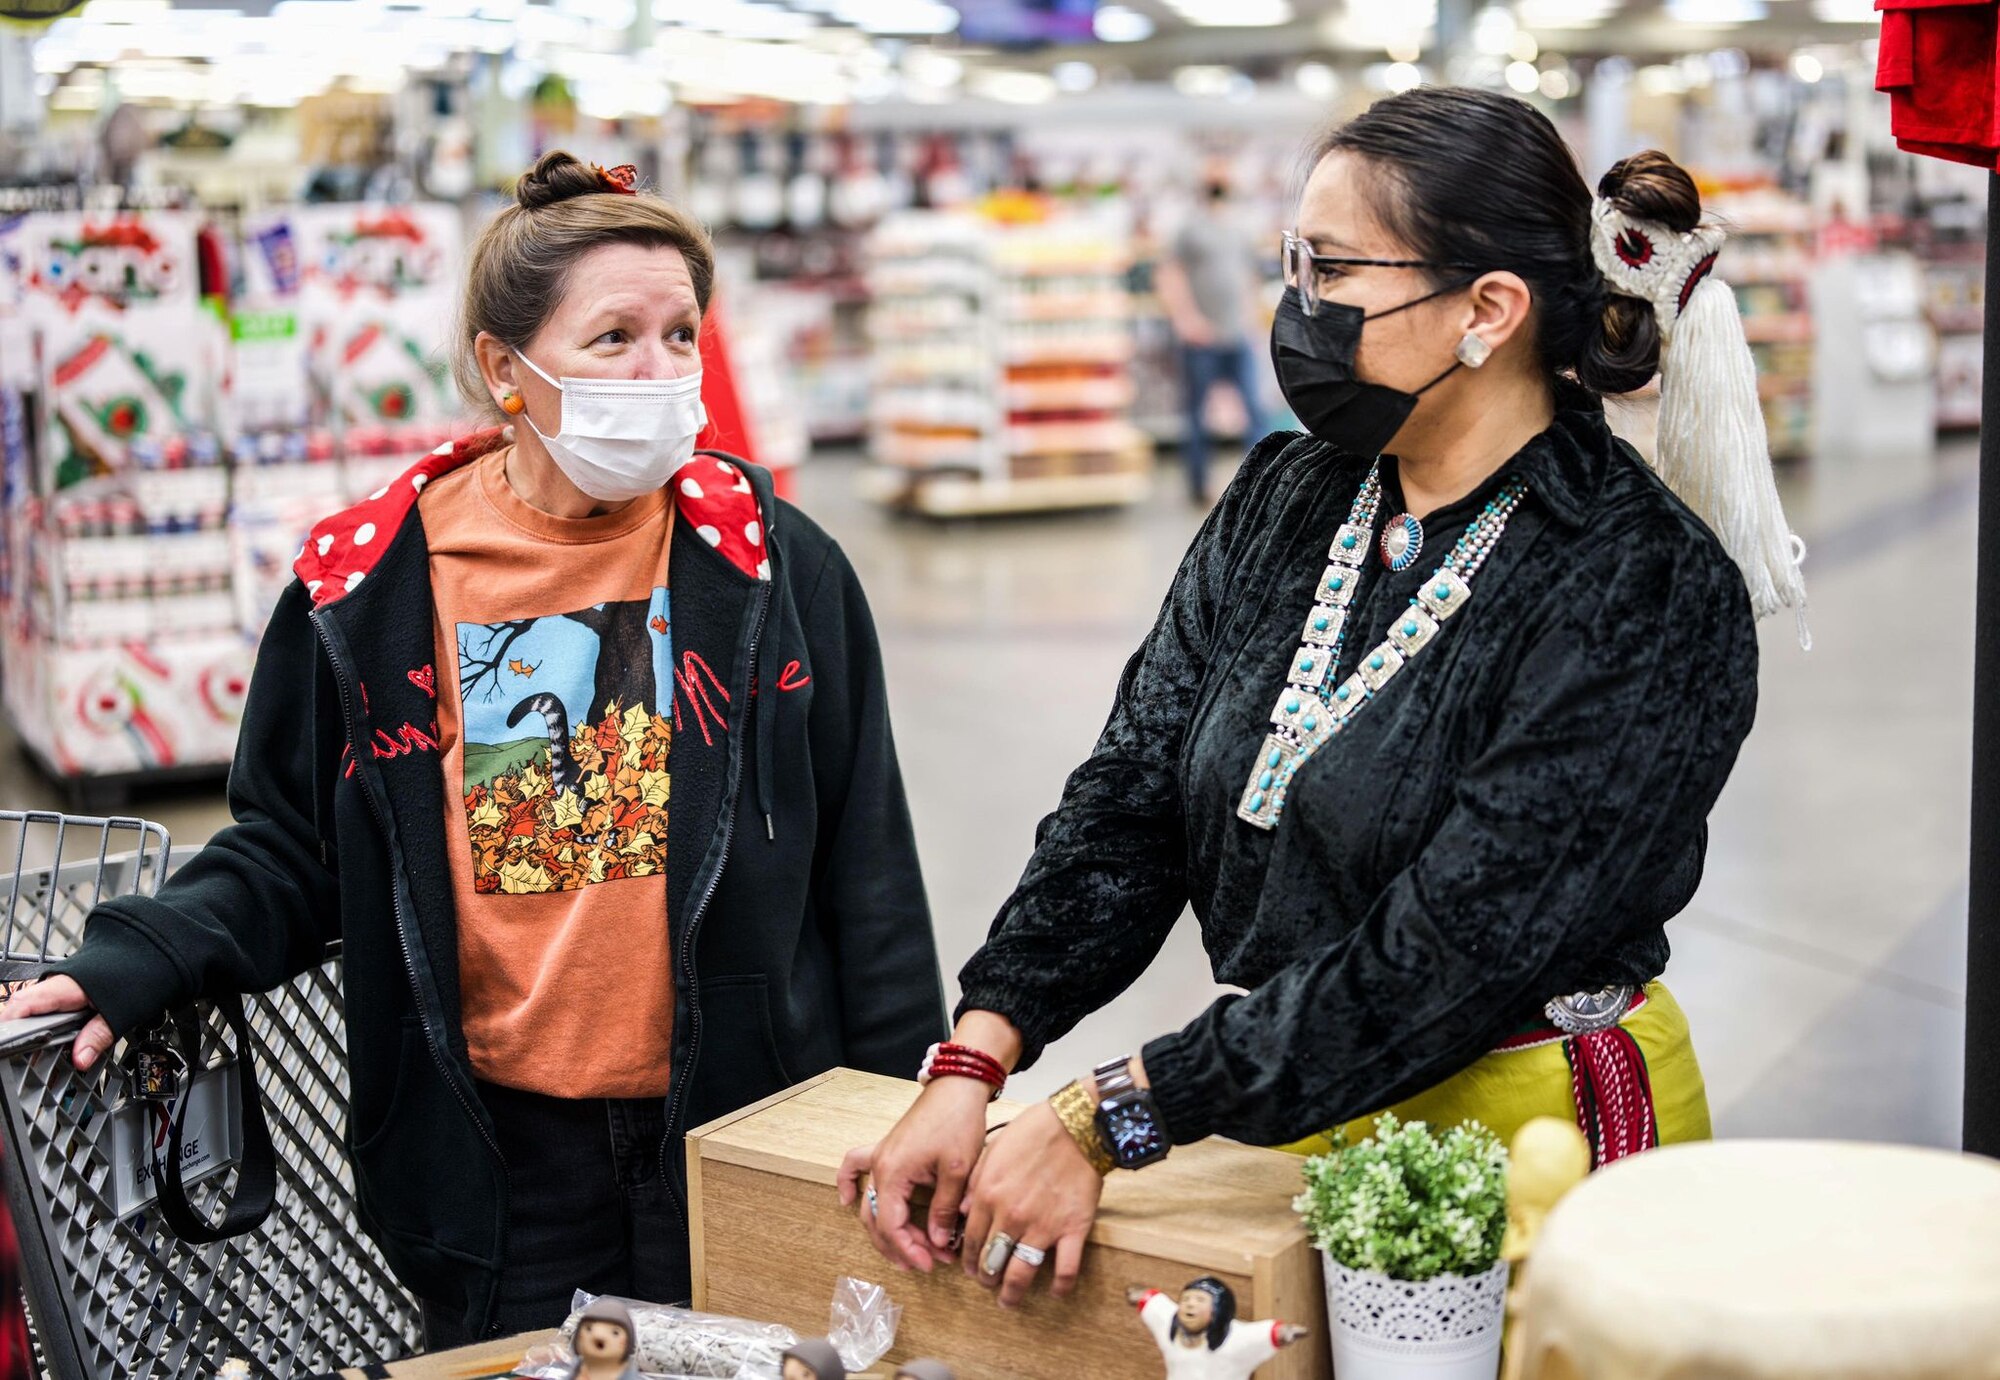 A woman in Native American regalia speaks with a woman in a black hoodie inside a department store setting